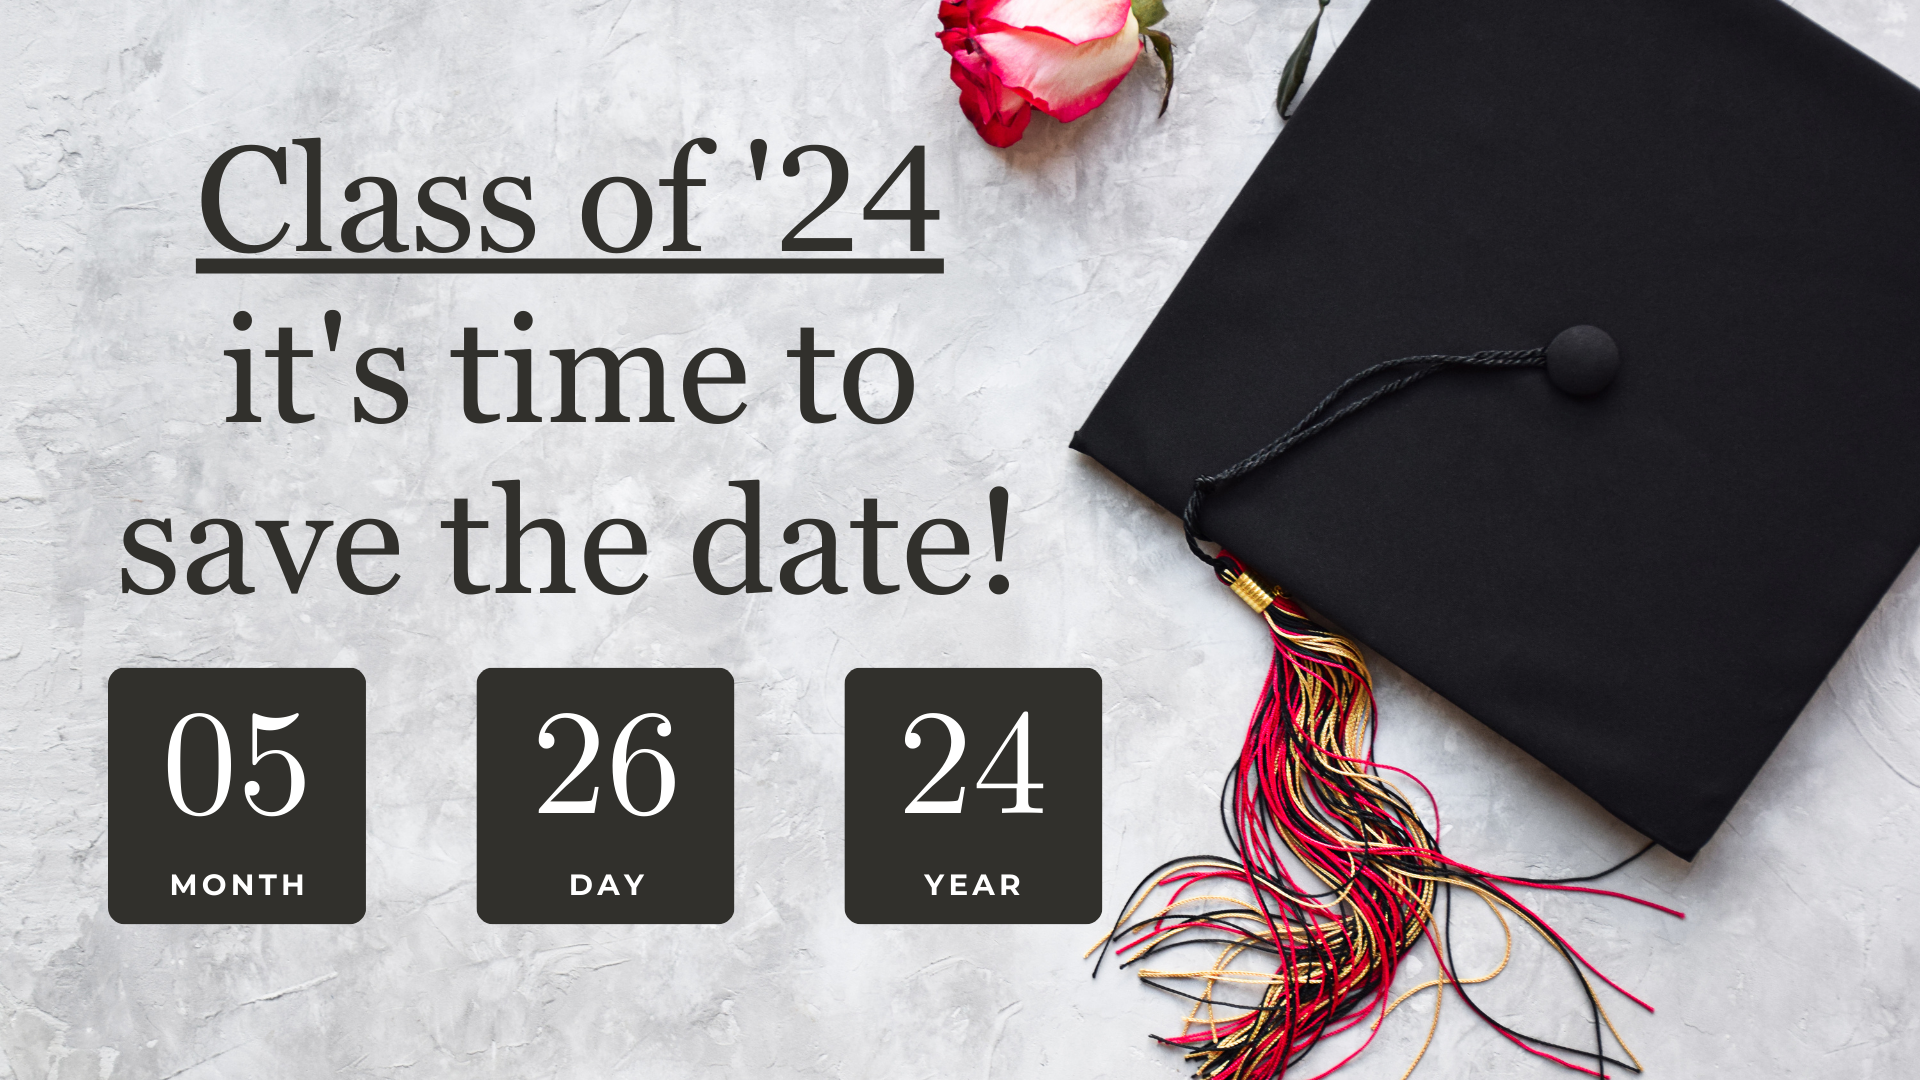 Class of 2024 - it is time to save the date!